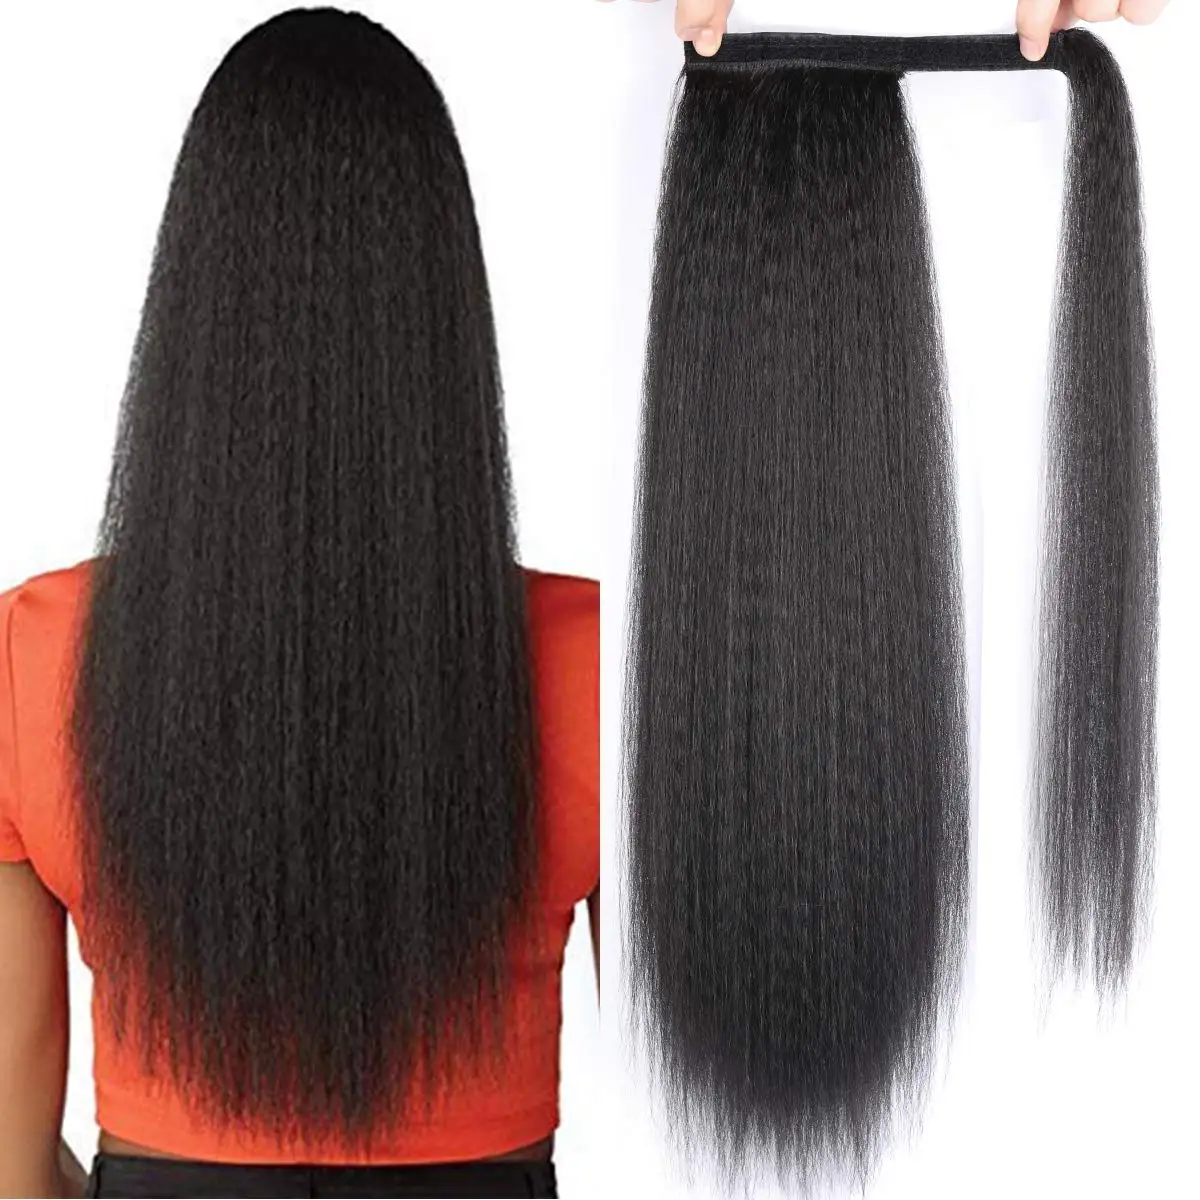 

Amazon Hot Sale Yaki Fluffy Hair Bundle Ponytail 24 Inch Synthetic Hair Ponytails, Pic showed